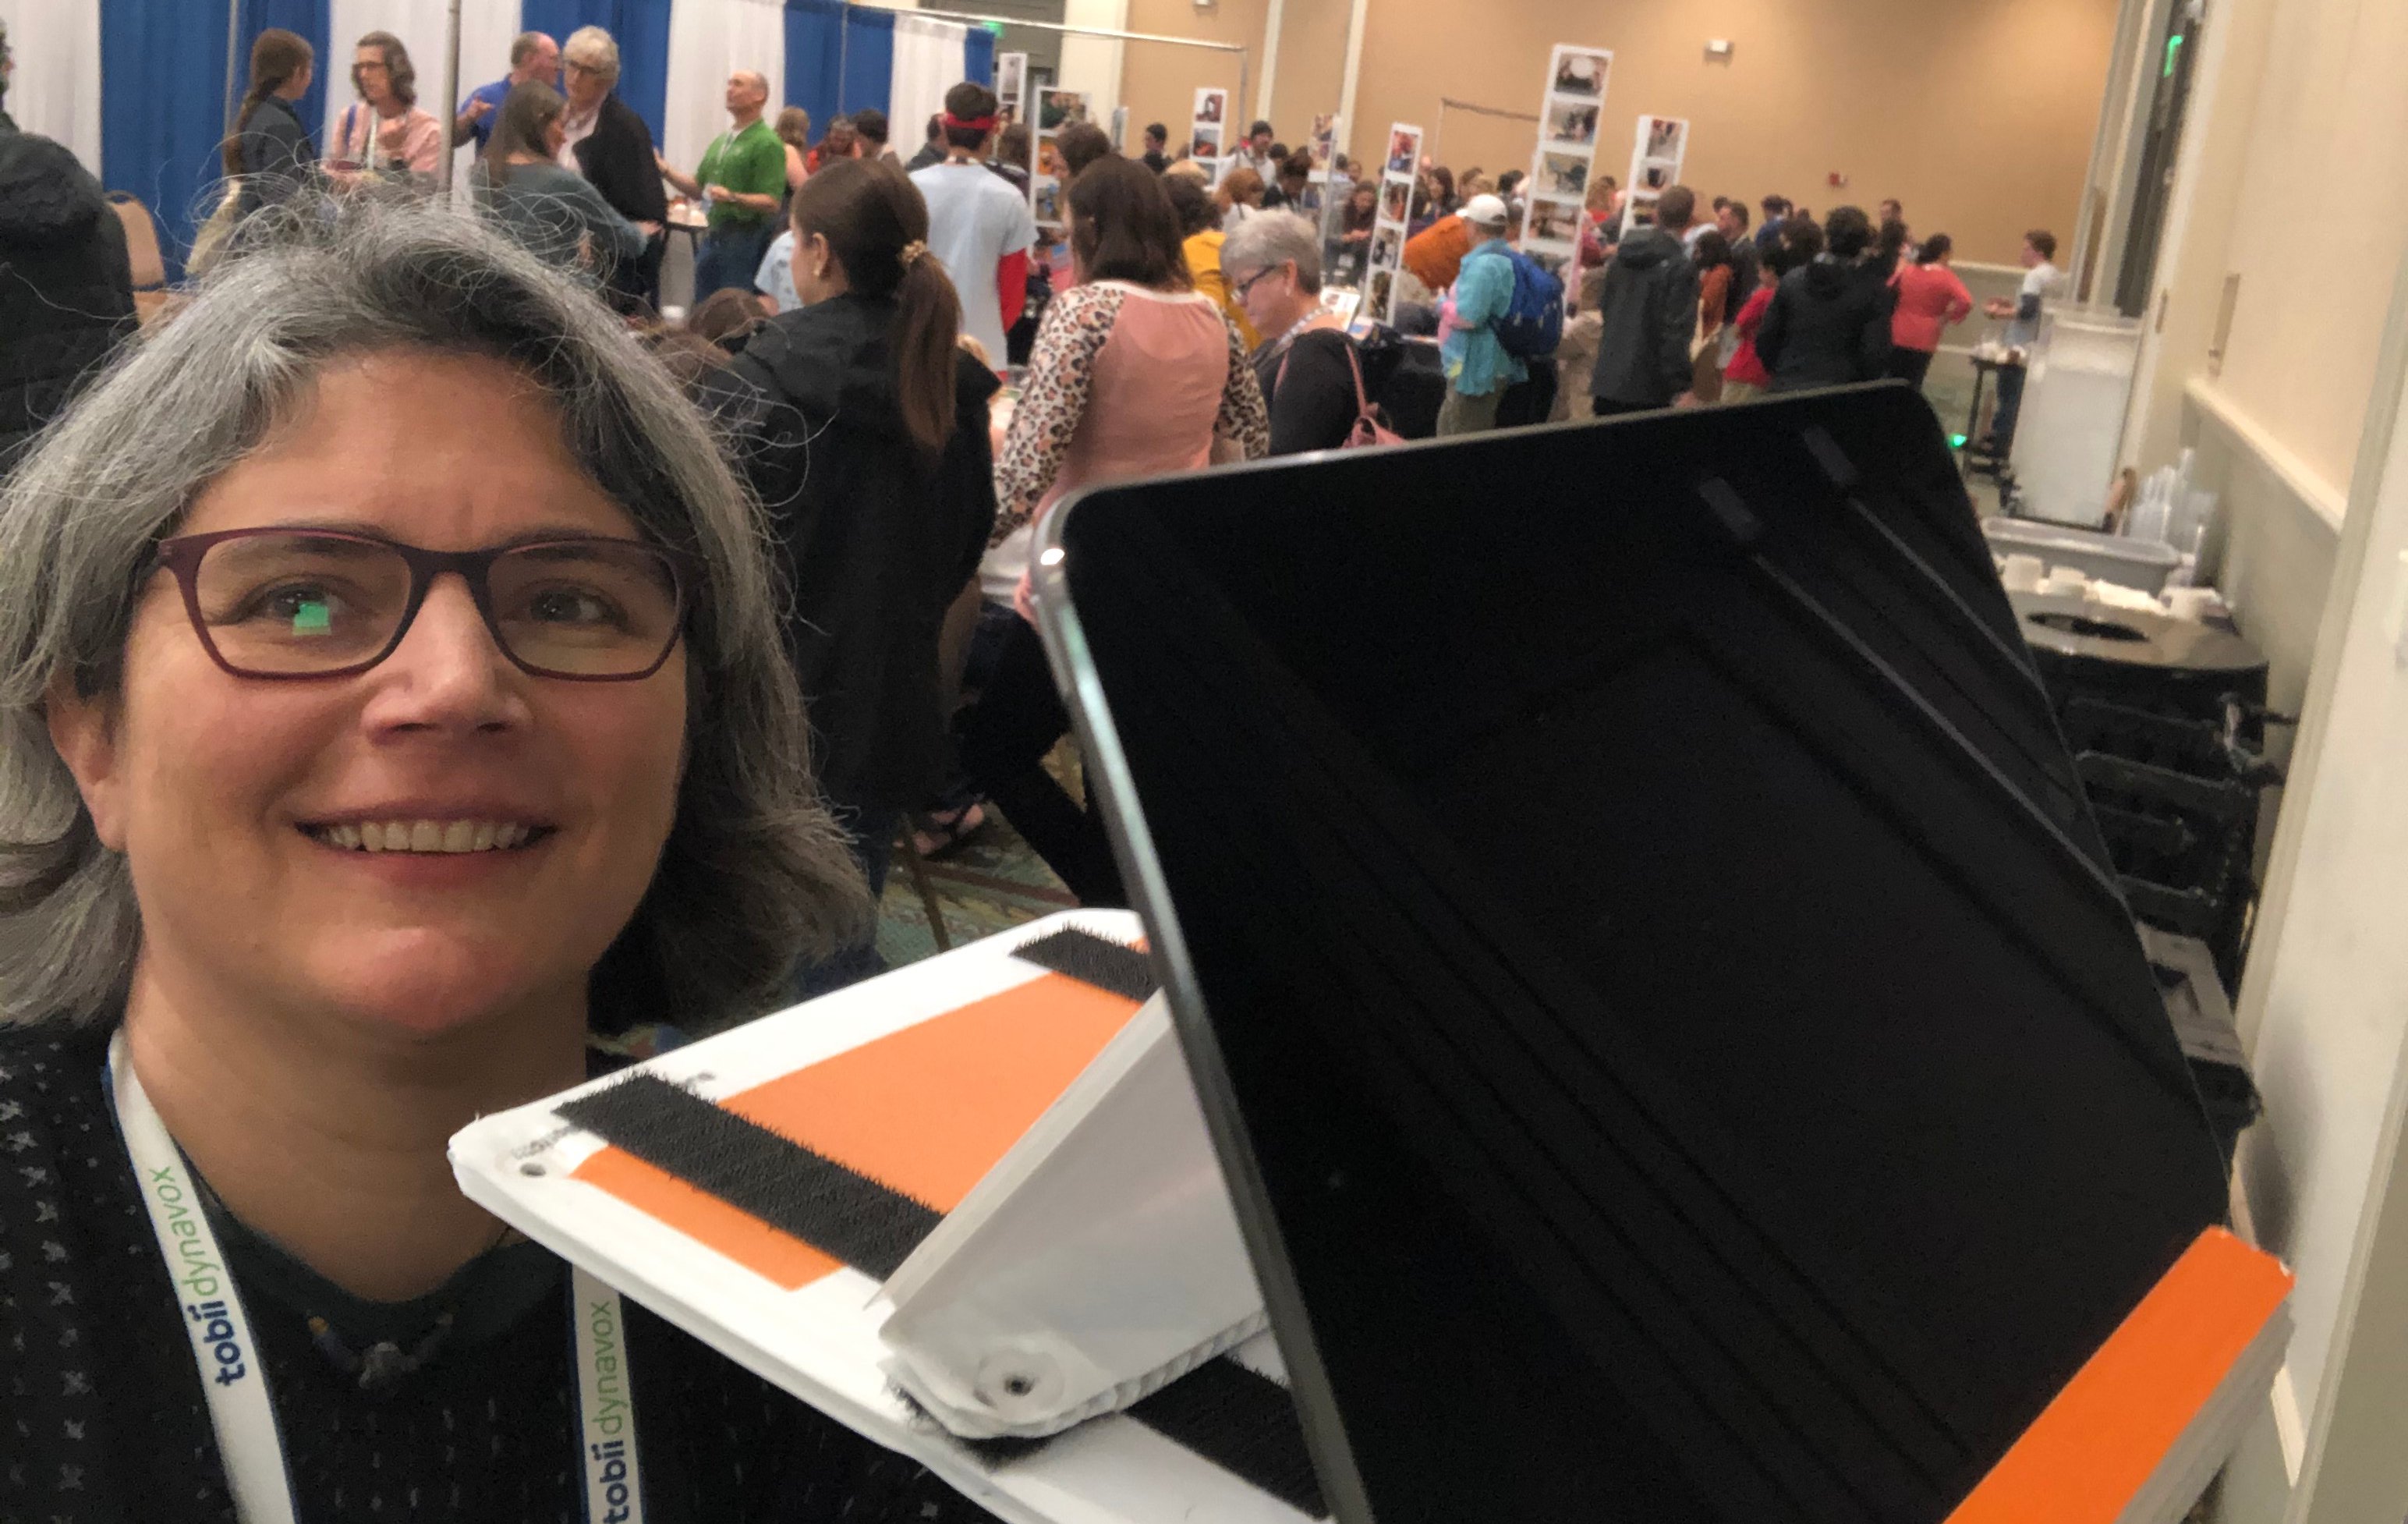 A woman smiles holding her iPad in it's fabricated stand in front of her in the foreground. Behind is a convention all with a crowd of people.